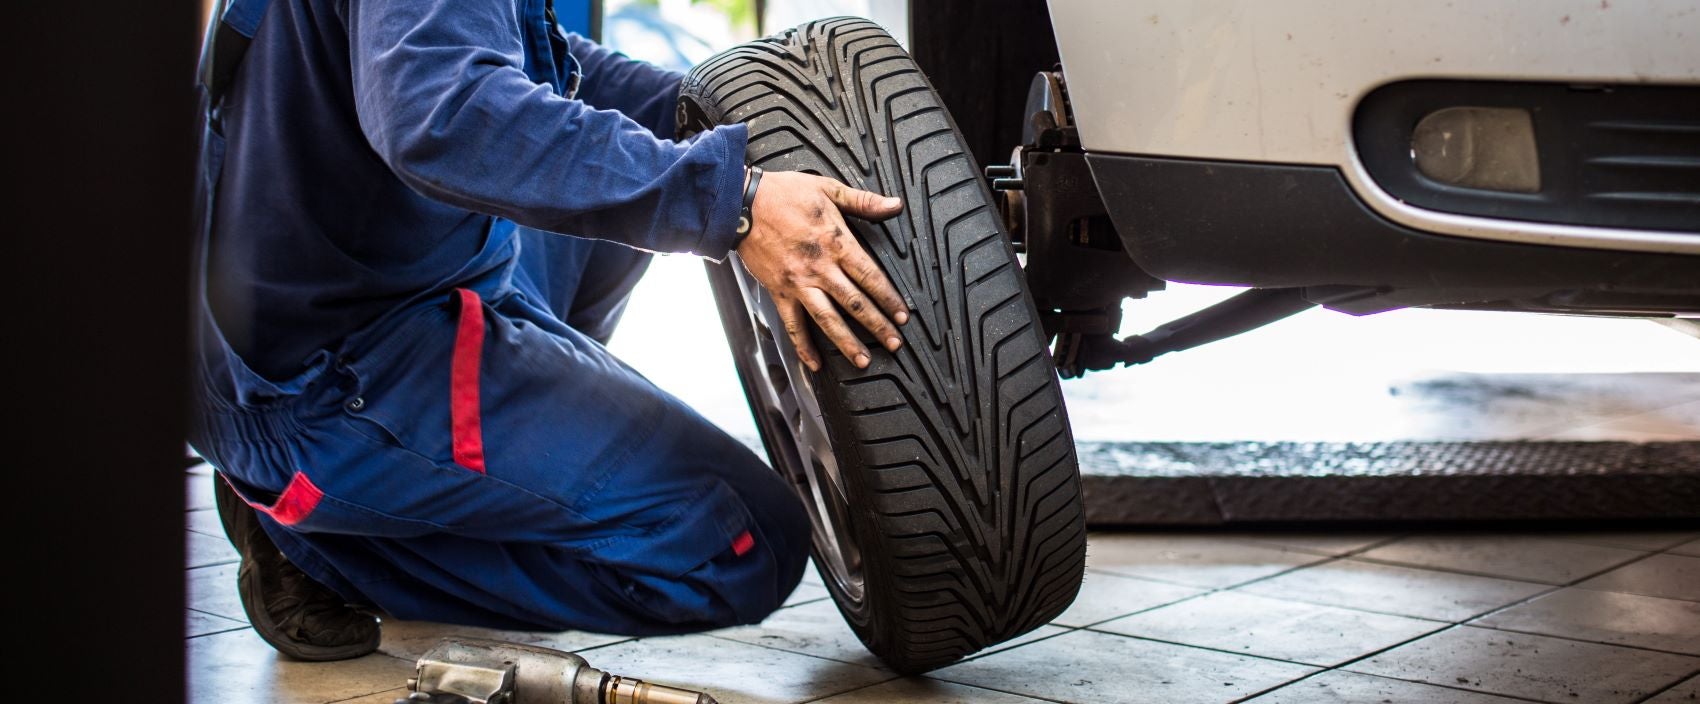 Drive Confident With New Tires